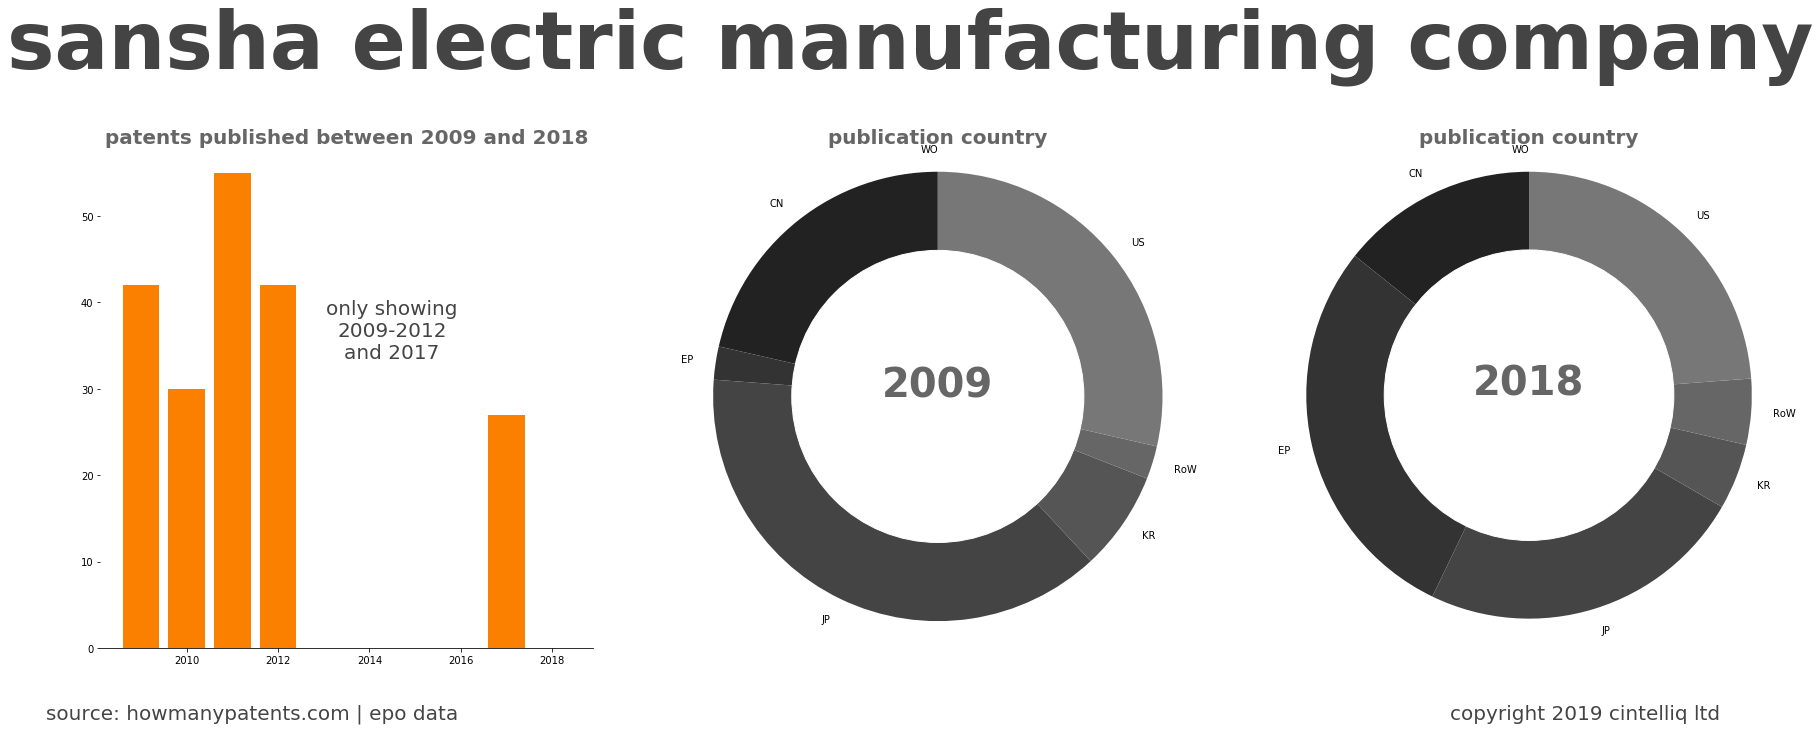 summary of patents for Sansha Electric Manufacturing Company